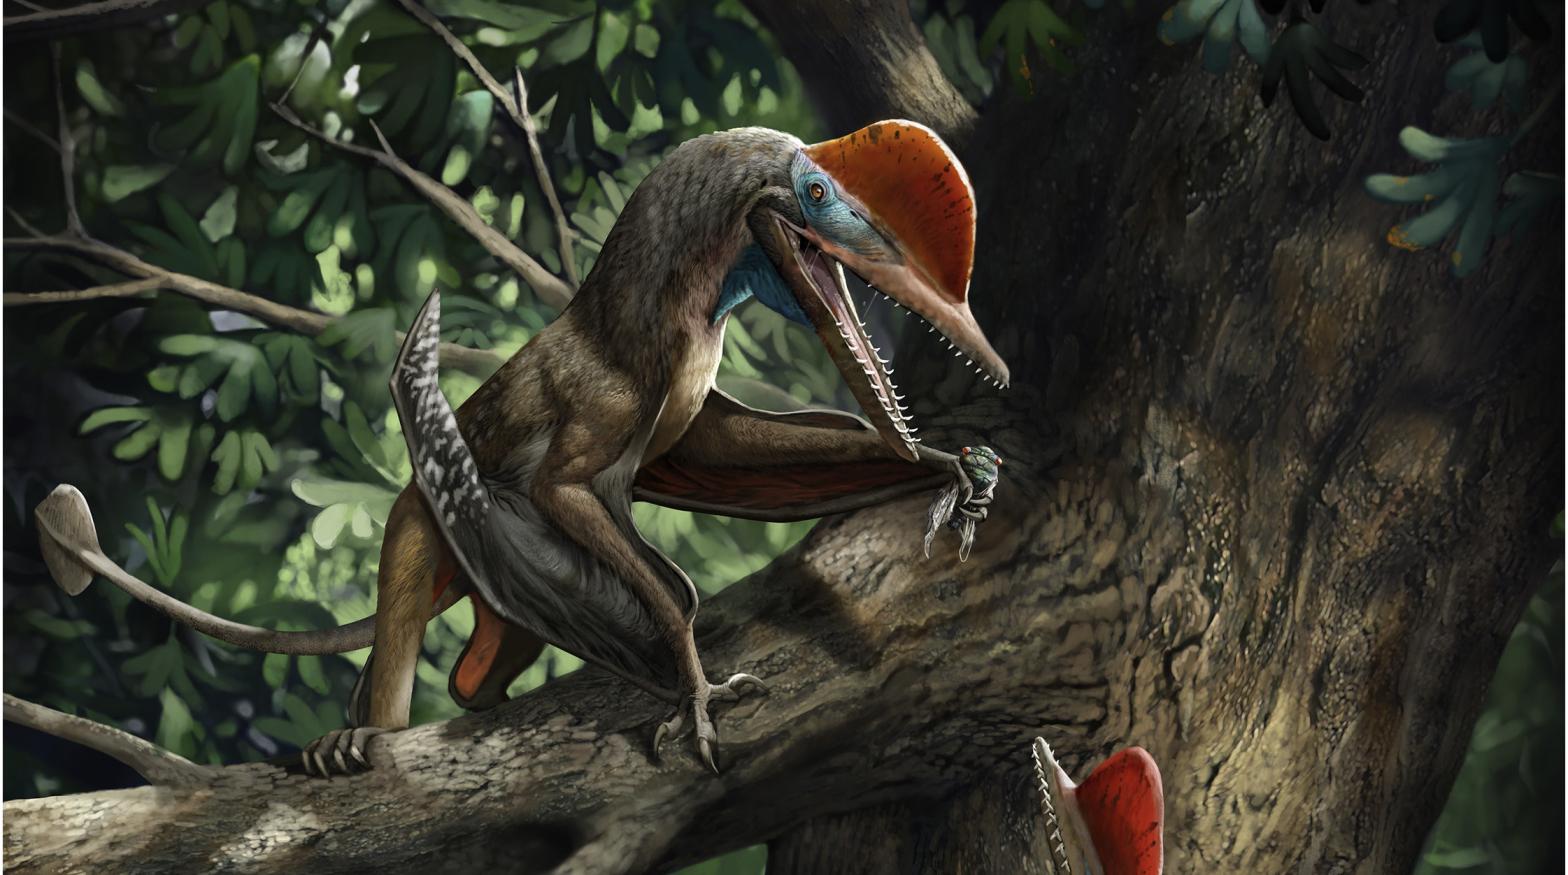 A paleoart rendition of what Kunpengopterus antipollicatus may have looked like.